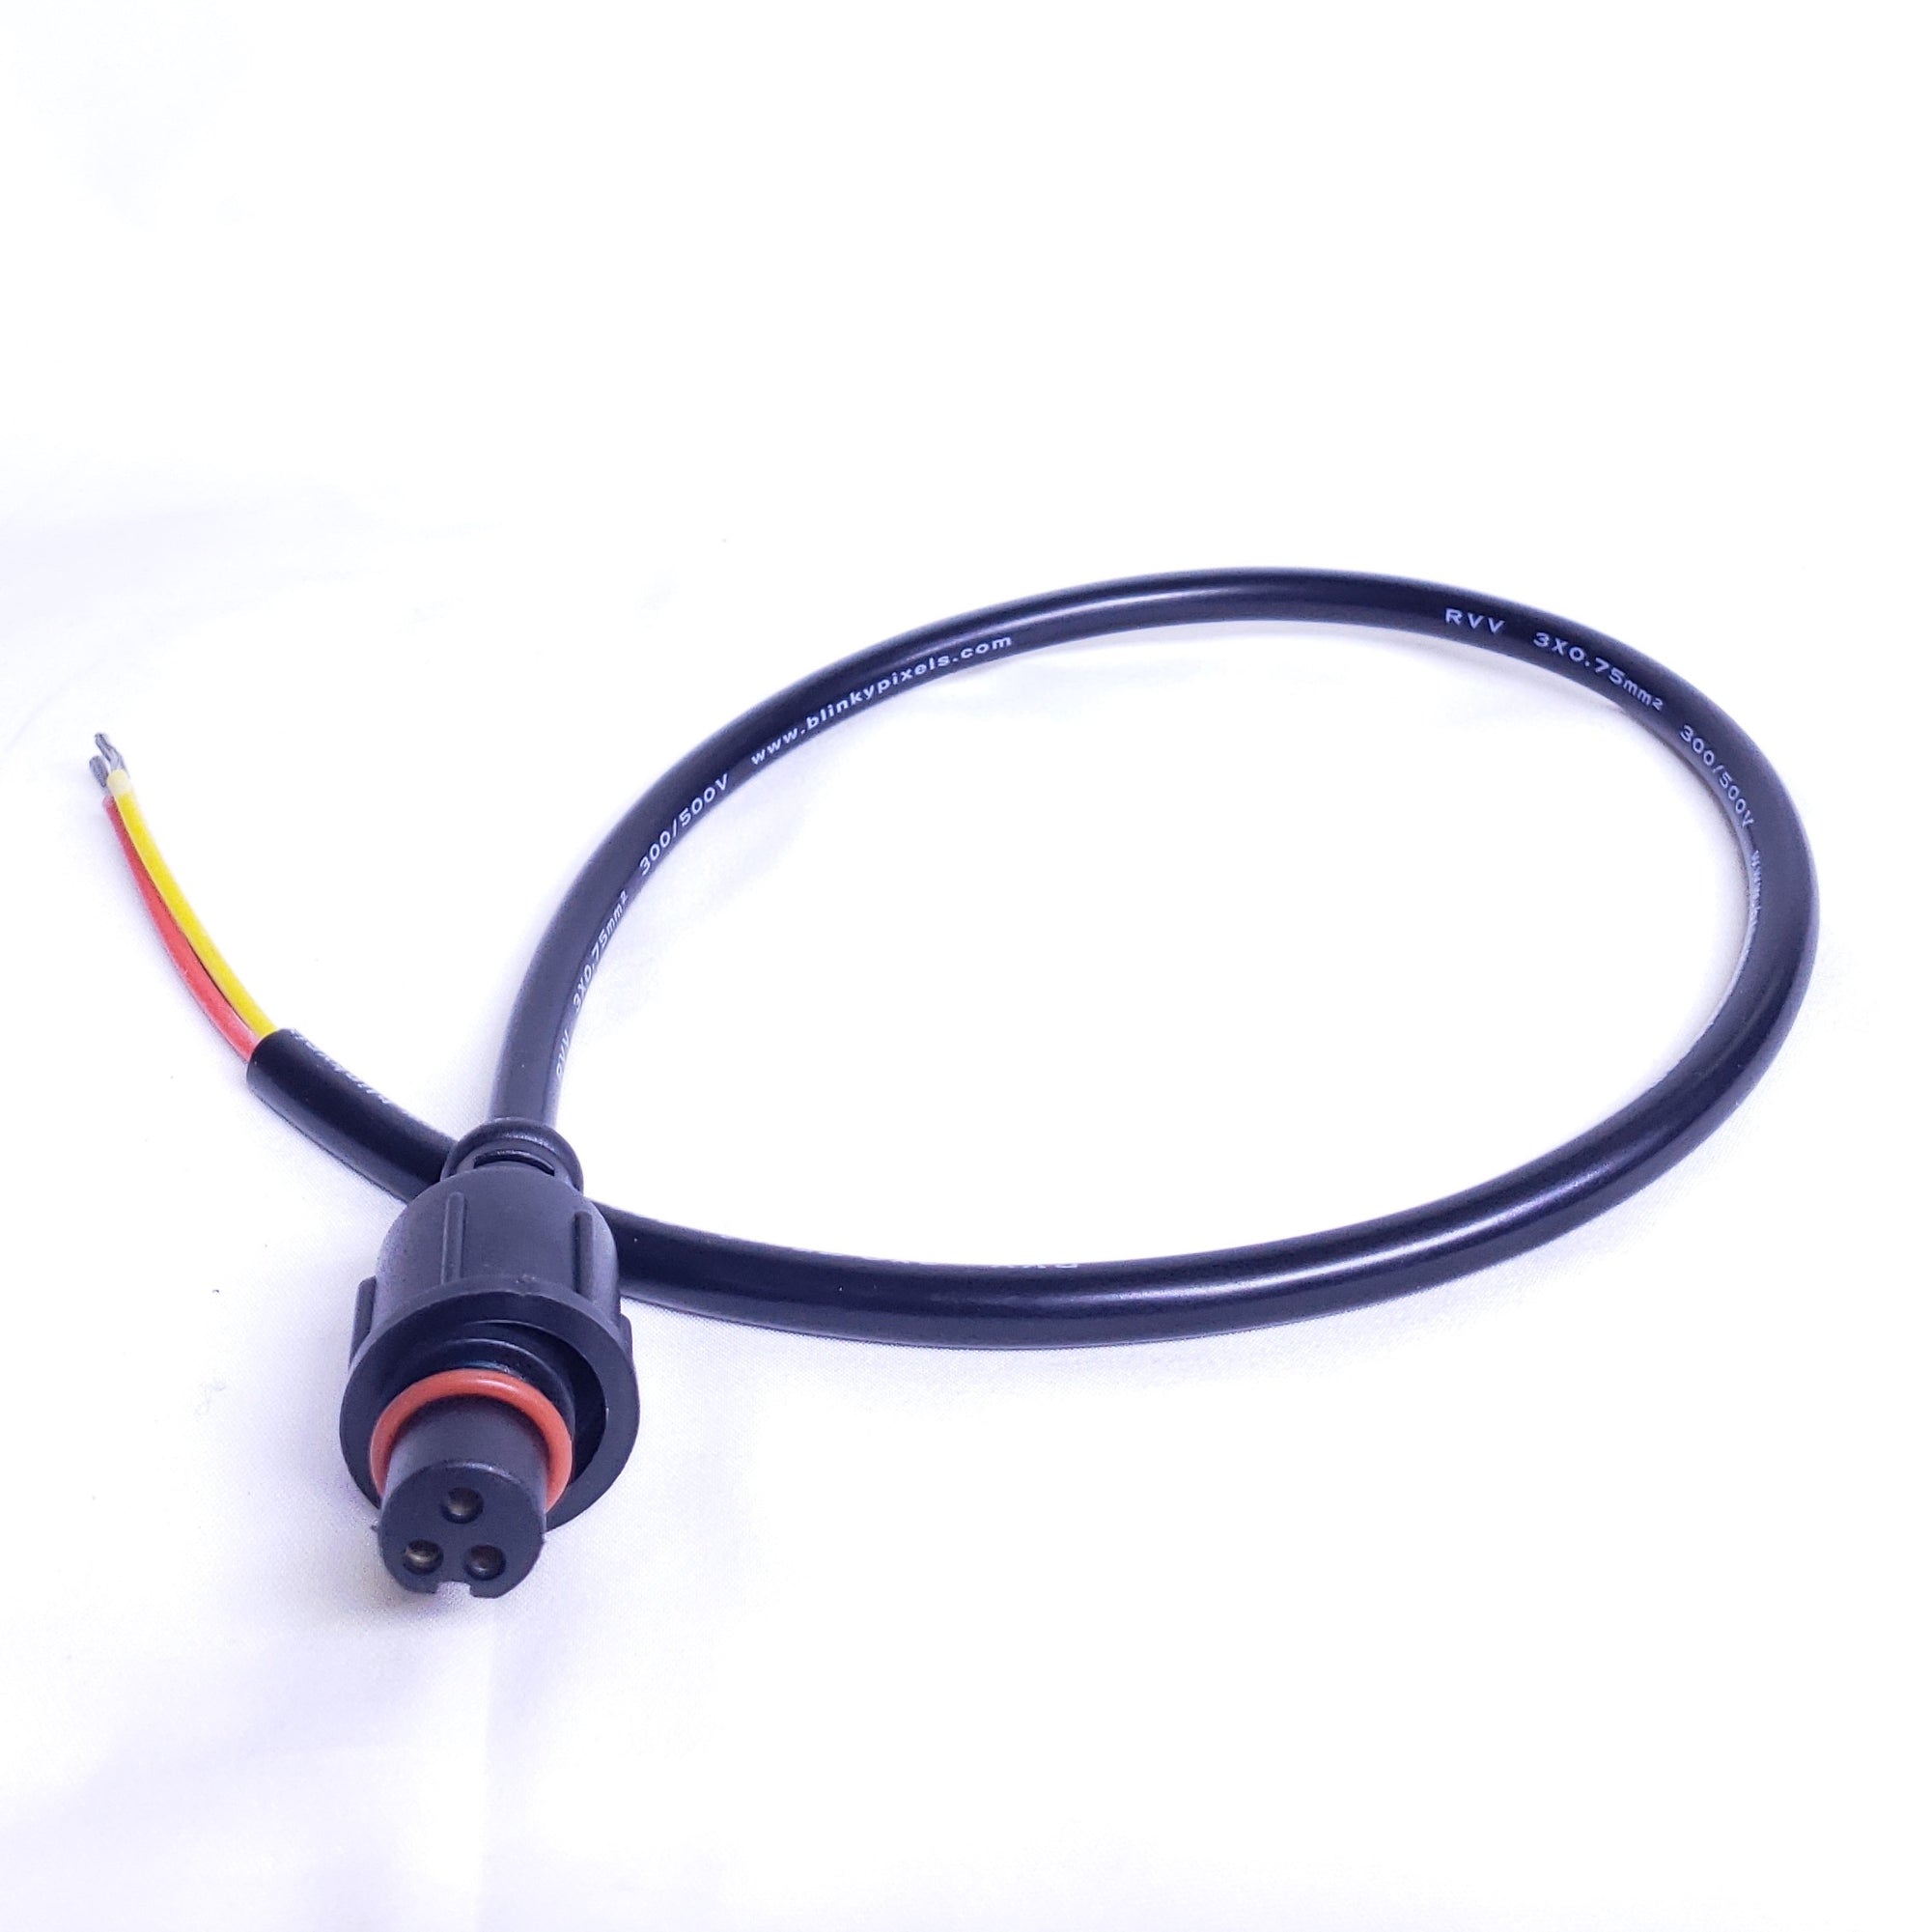 Pigtail (Female) - xConnect - 3 Core - 20in / 0.5m - Round Wire - Black